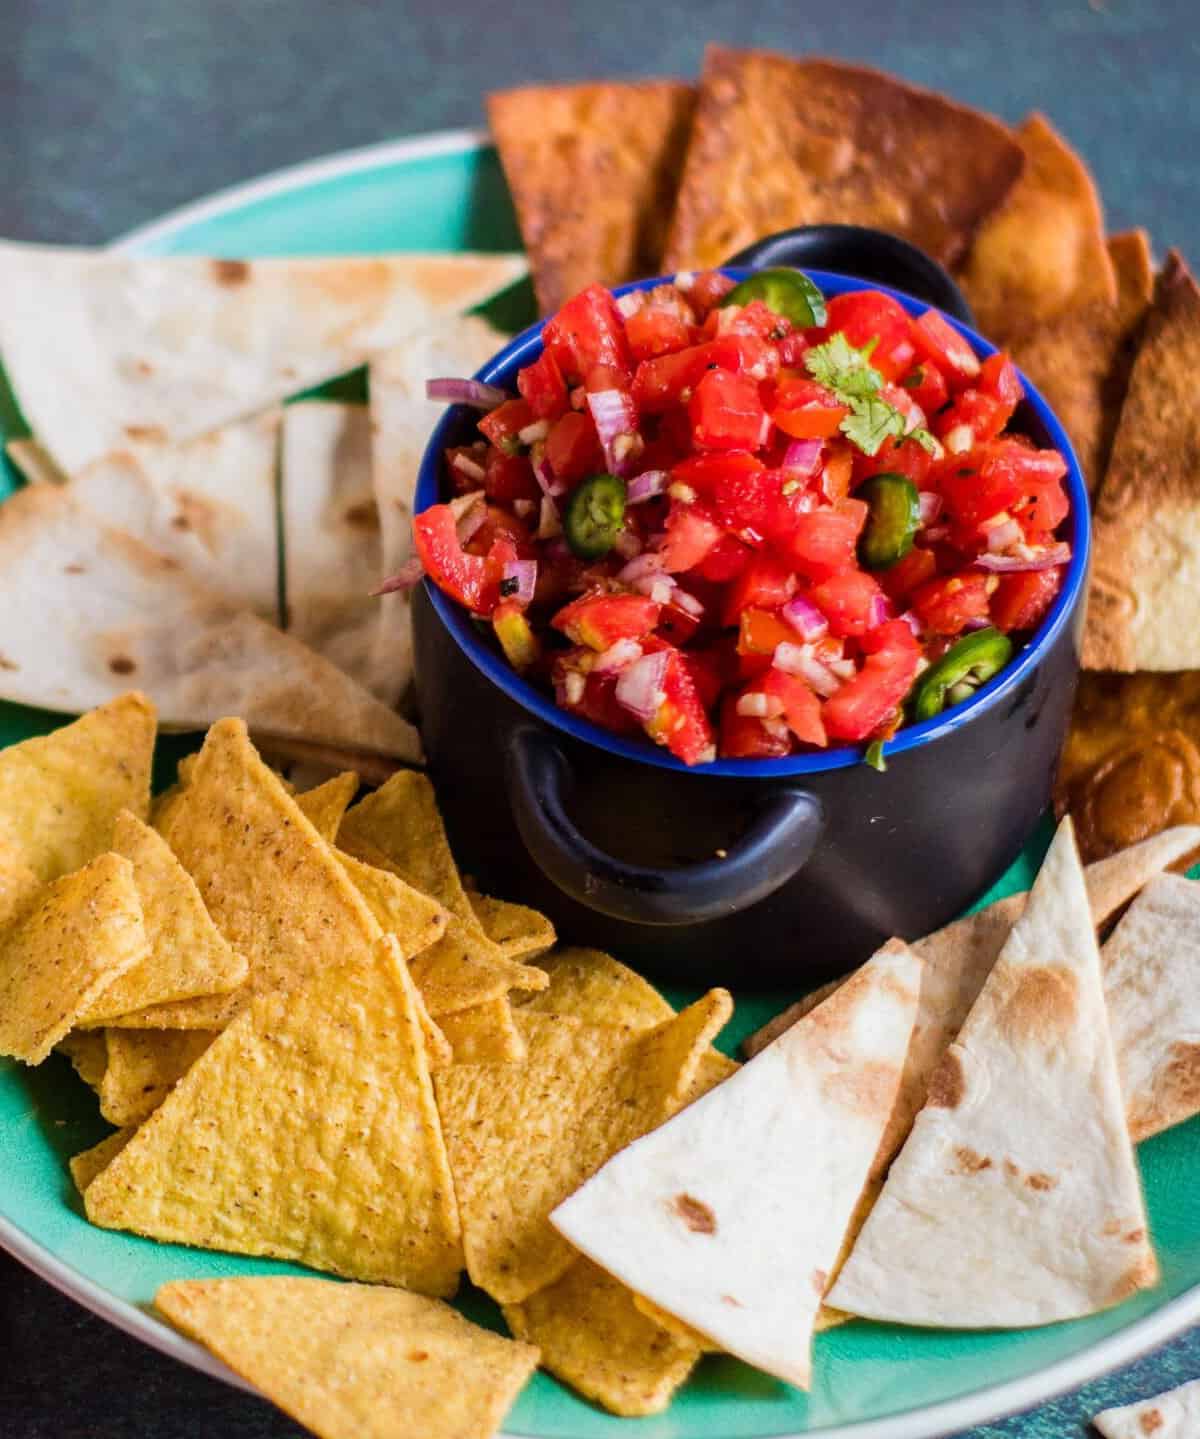  Get ready to spice things up with this homemade salsa